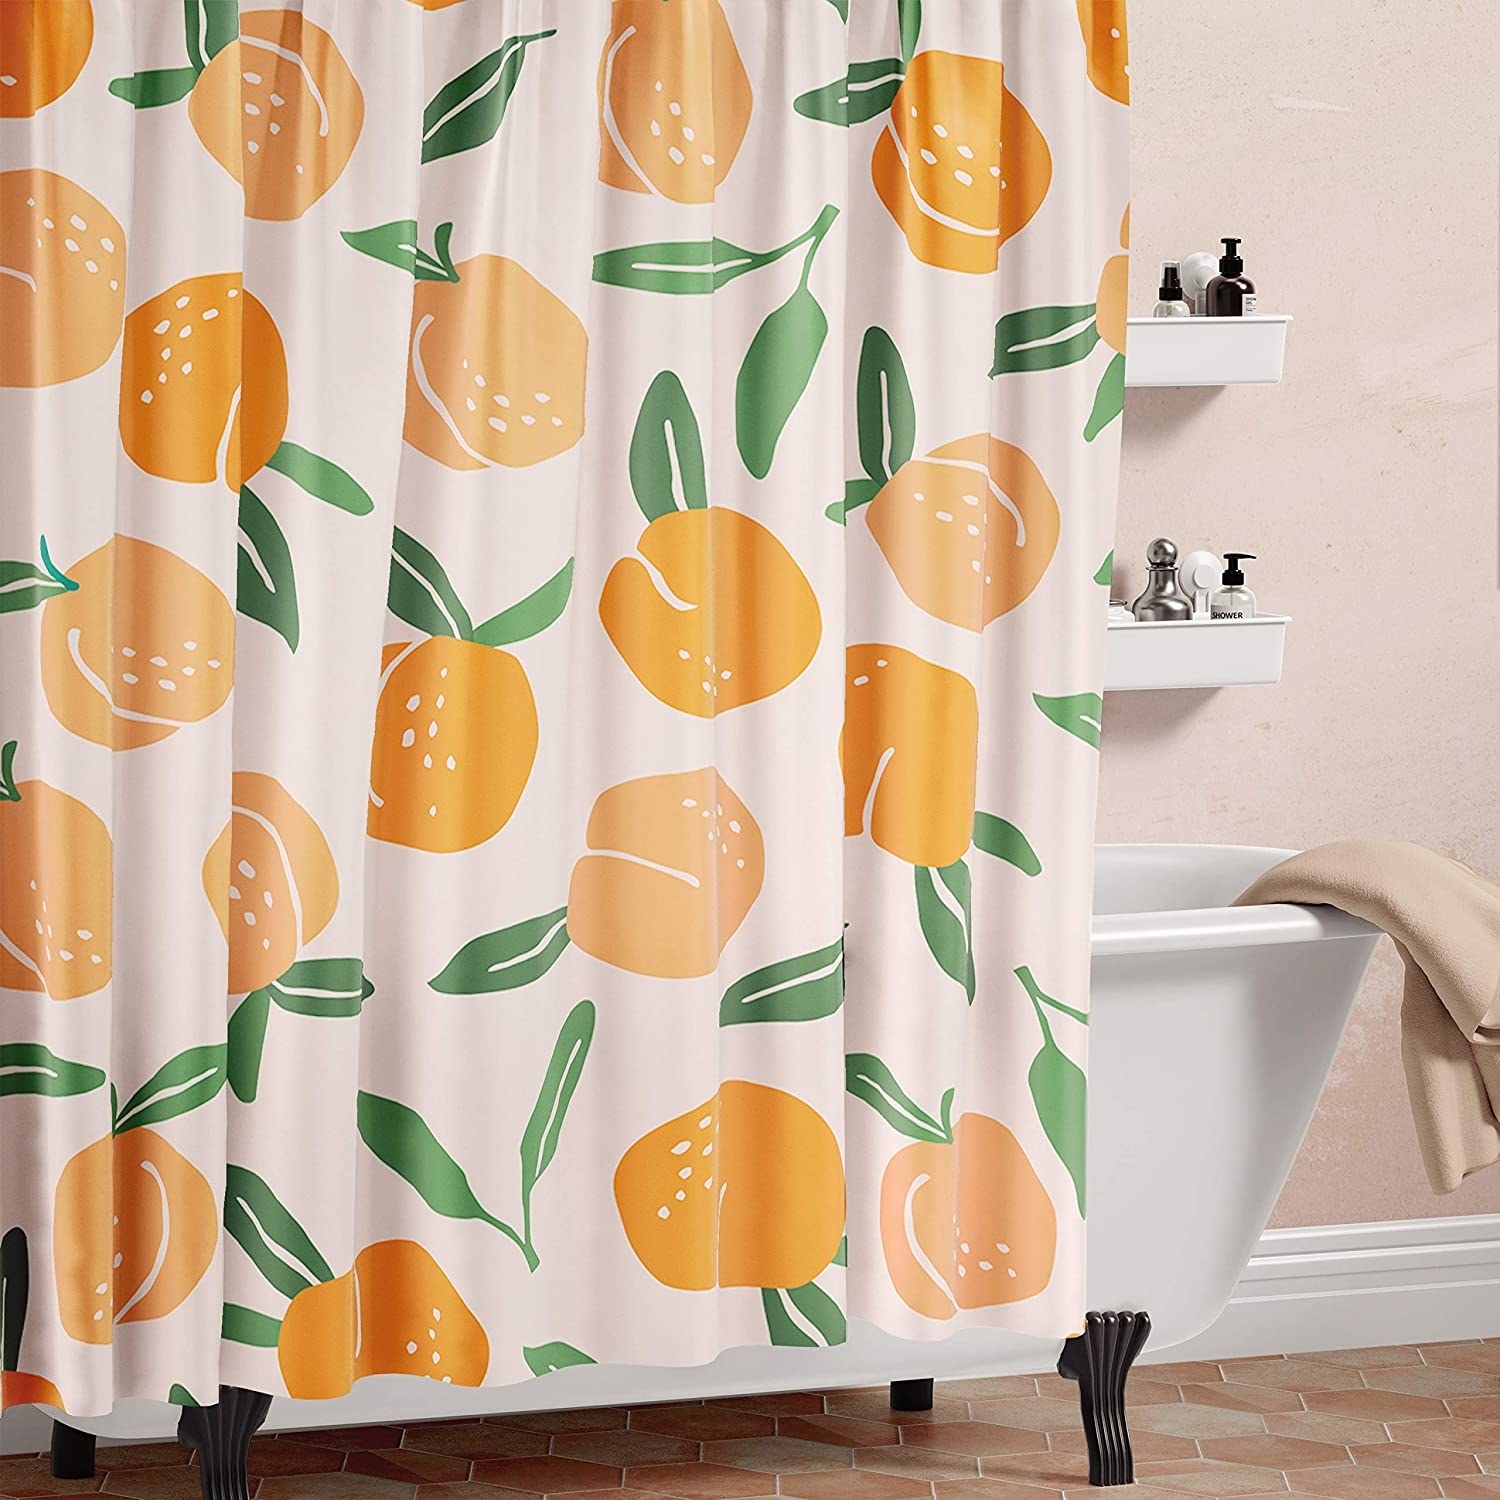 the shower curtain with the orange pattern